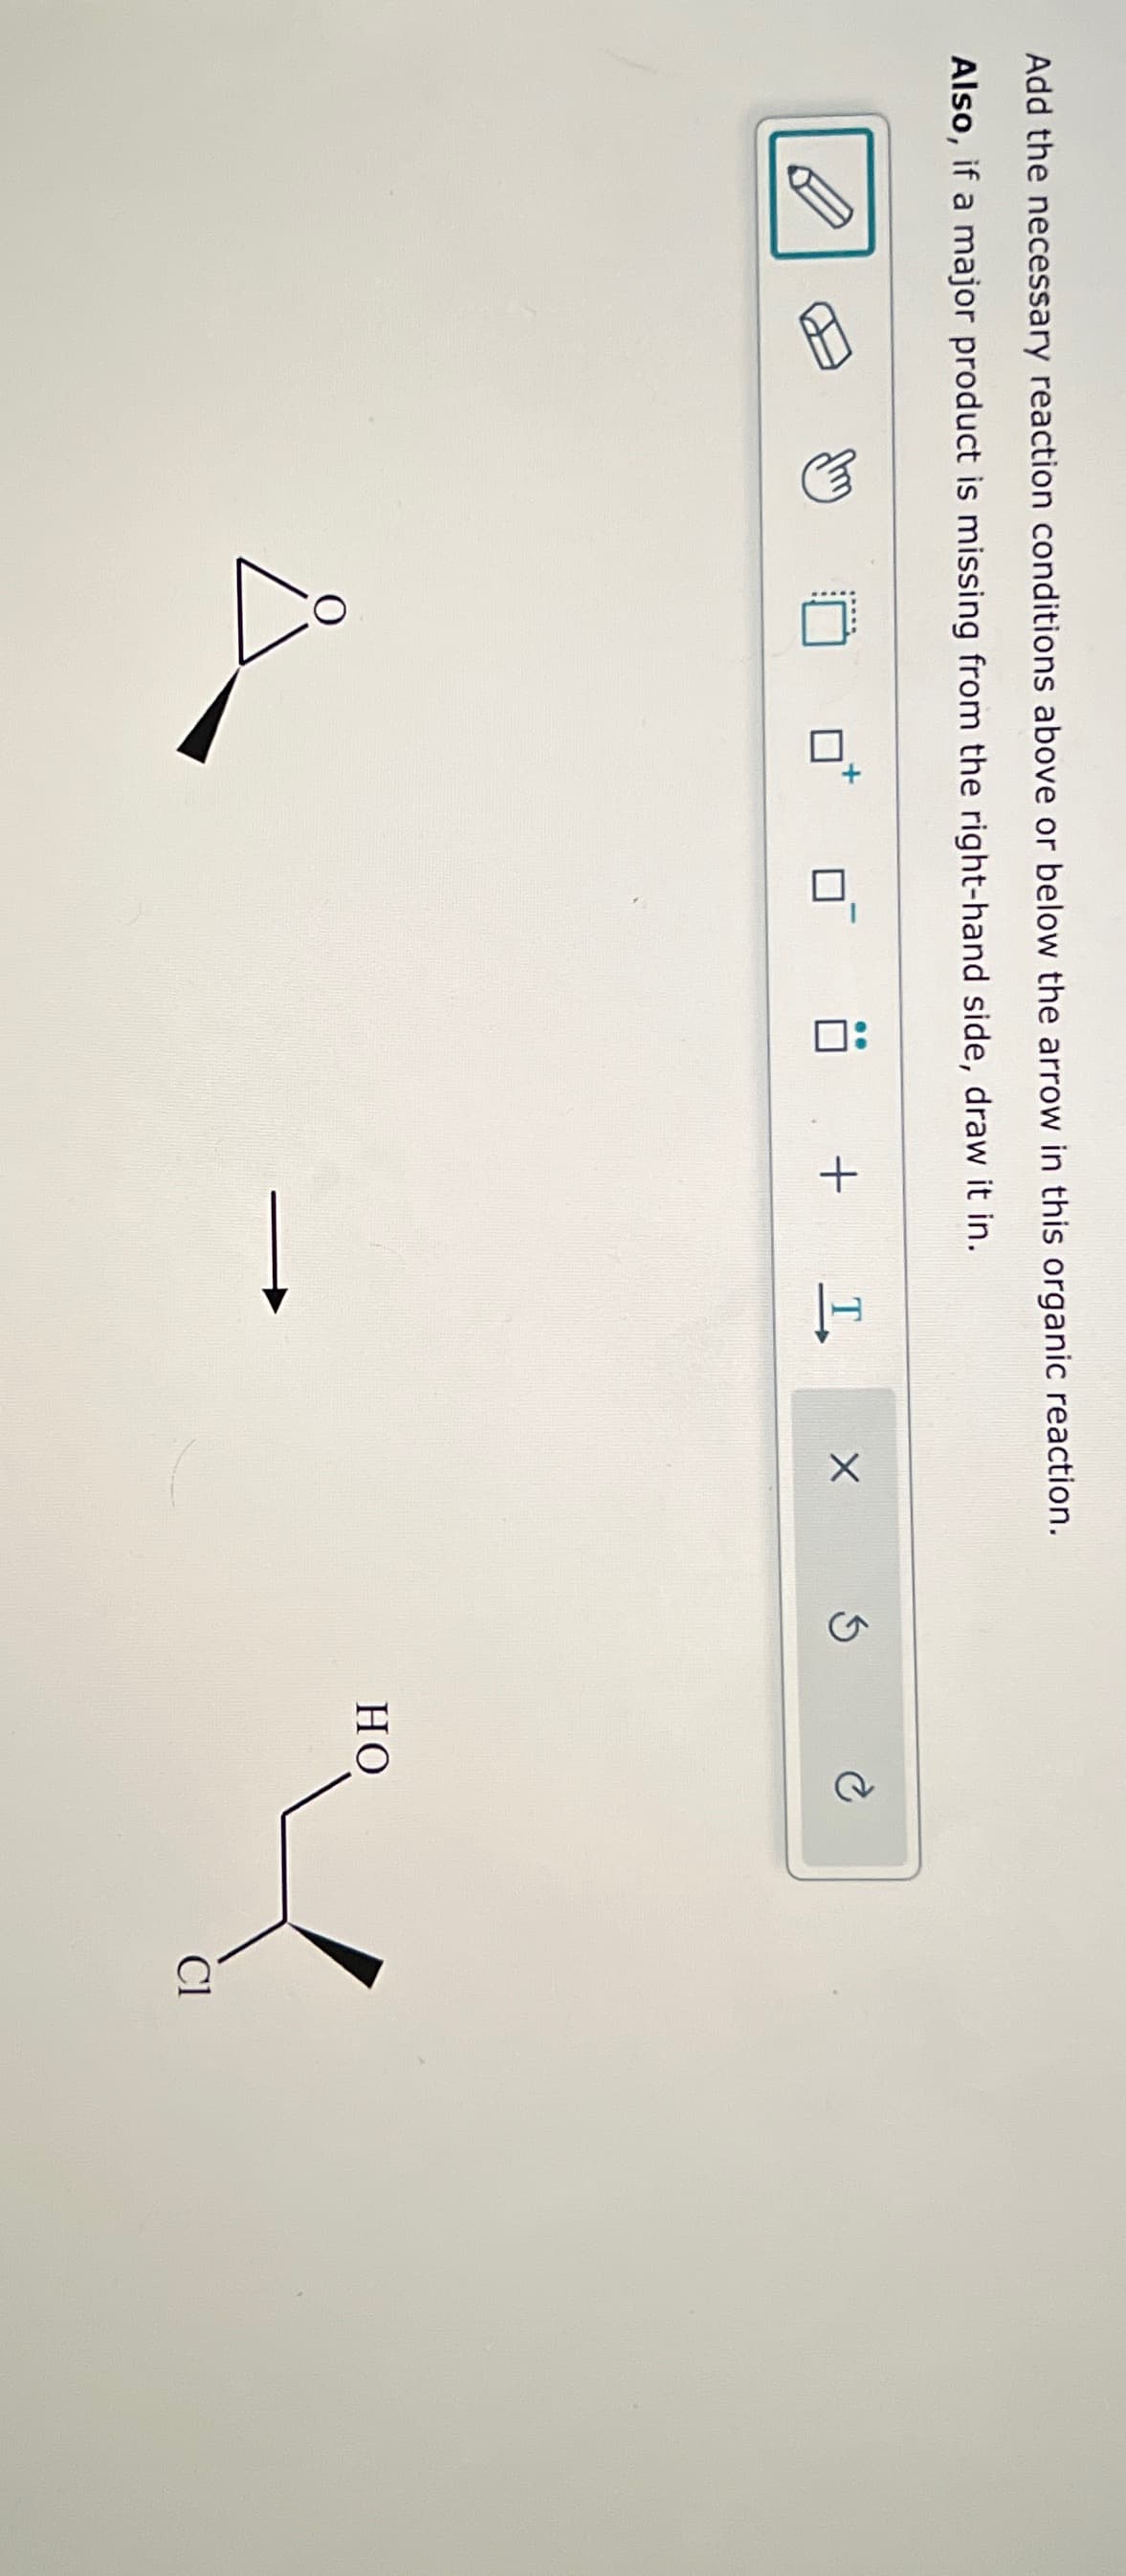 Add the necessary reaction conditions above or below the arrow in this organic reaction.
Also, if a major product is missing from the right-hand side, draw it in.
+
I
X
HO
Cl